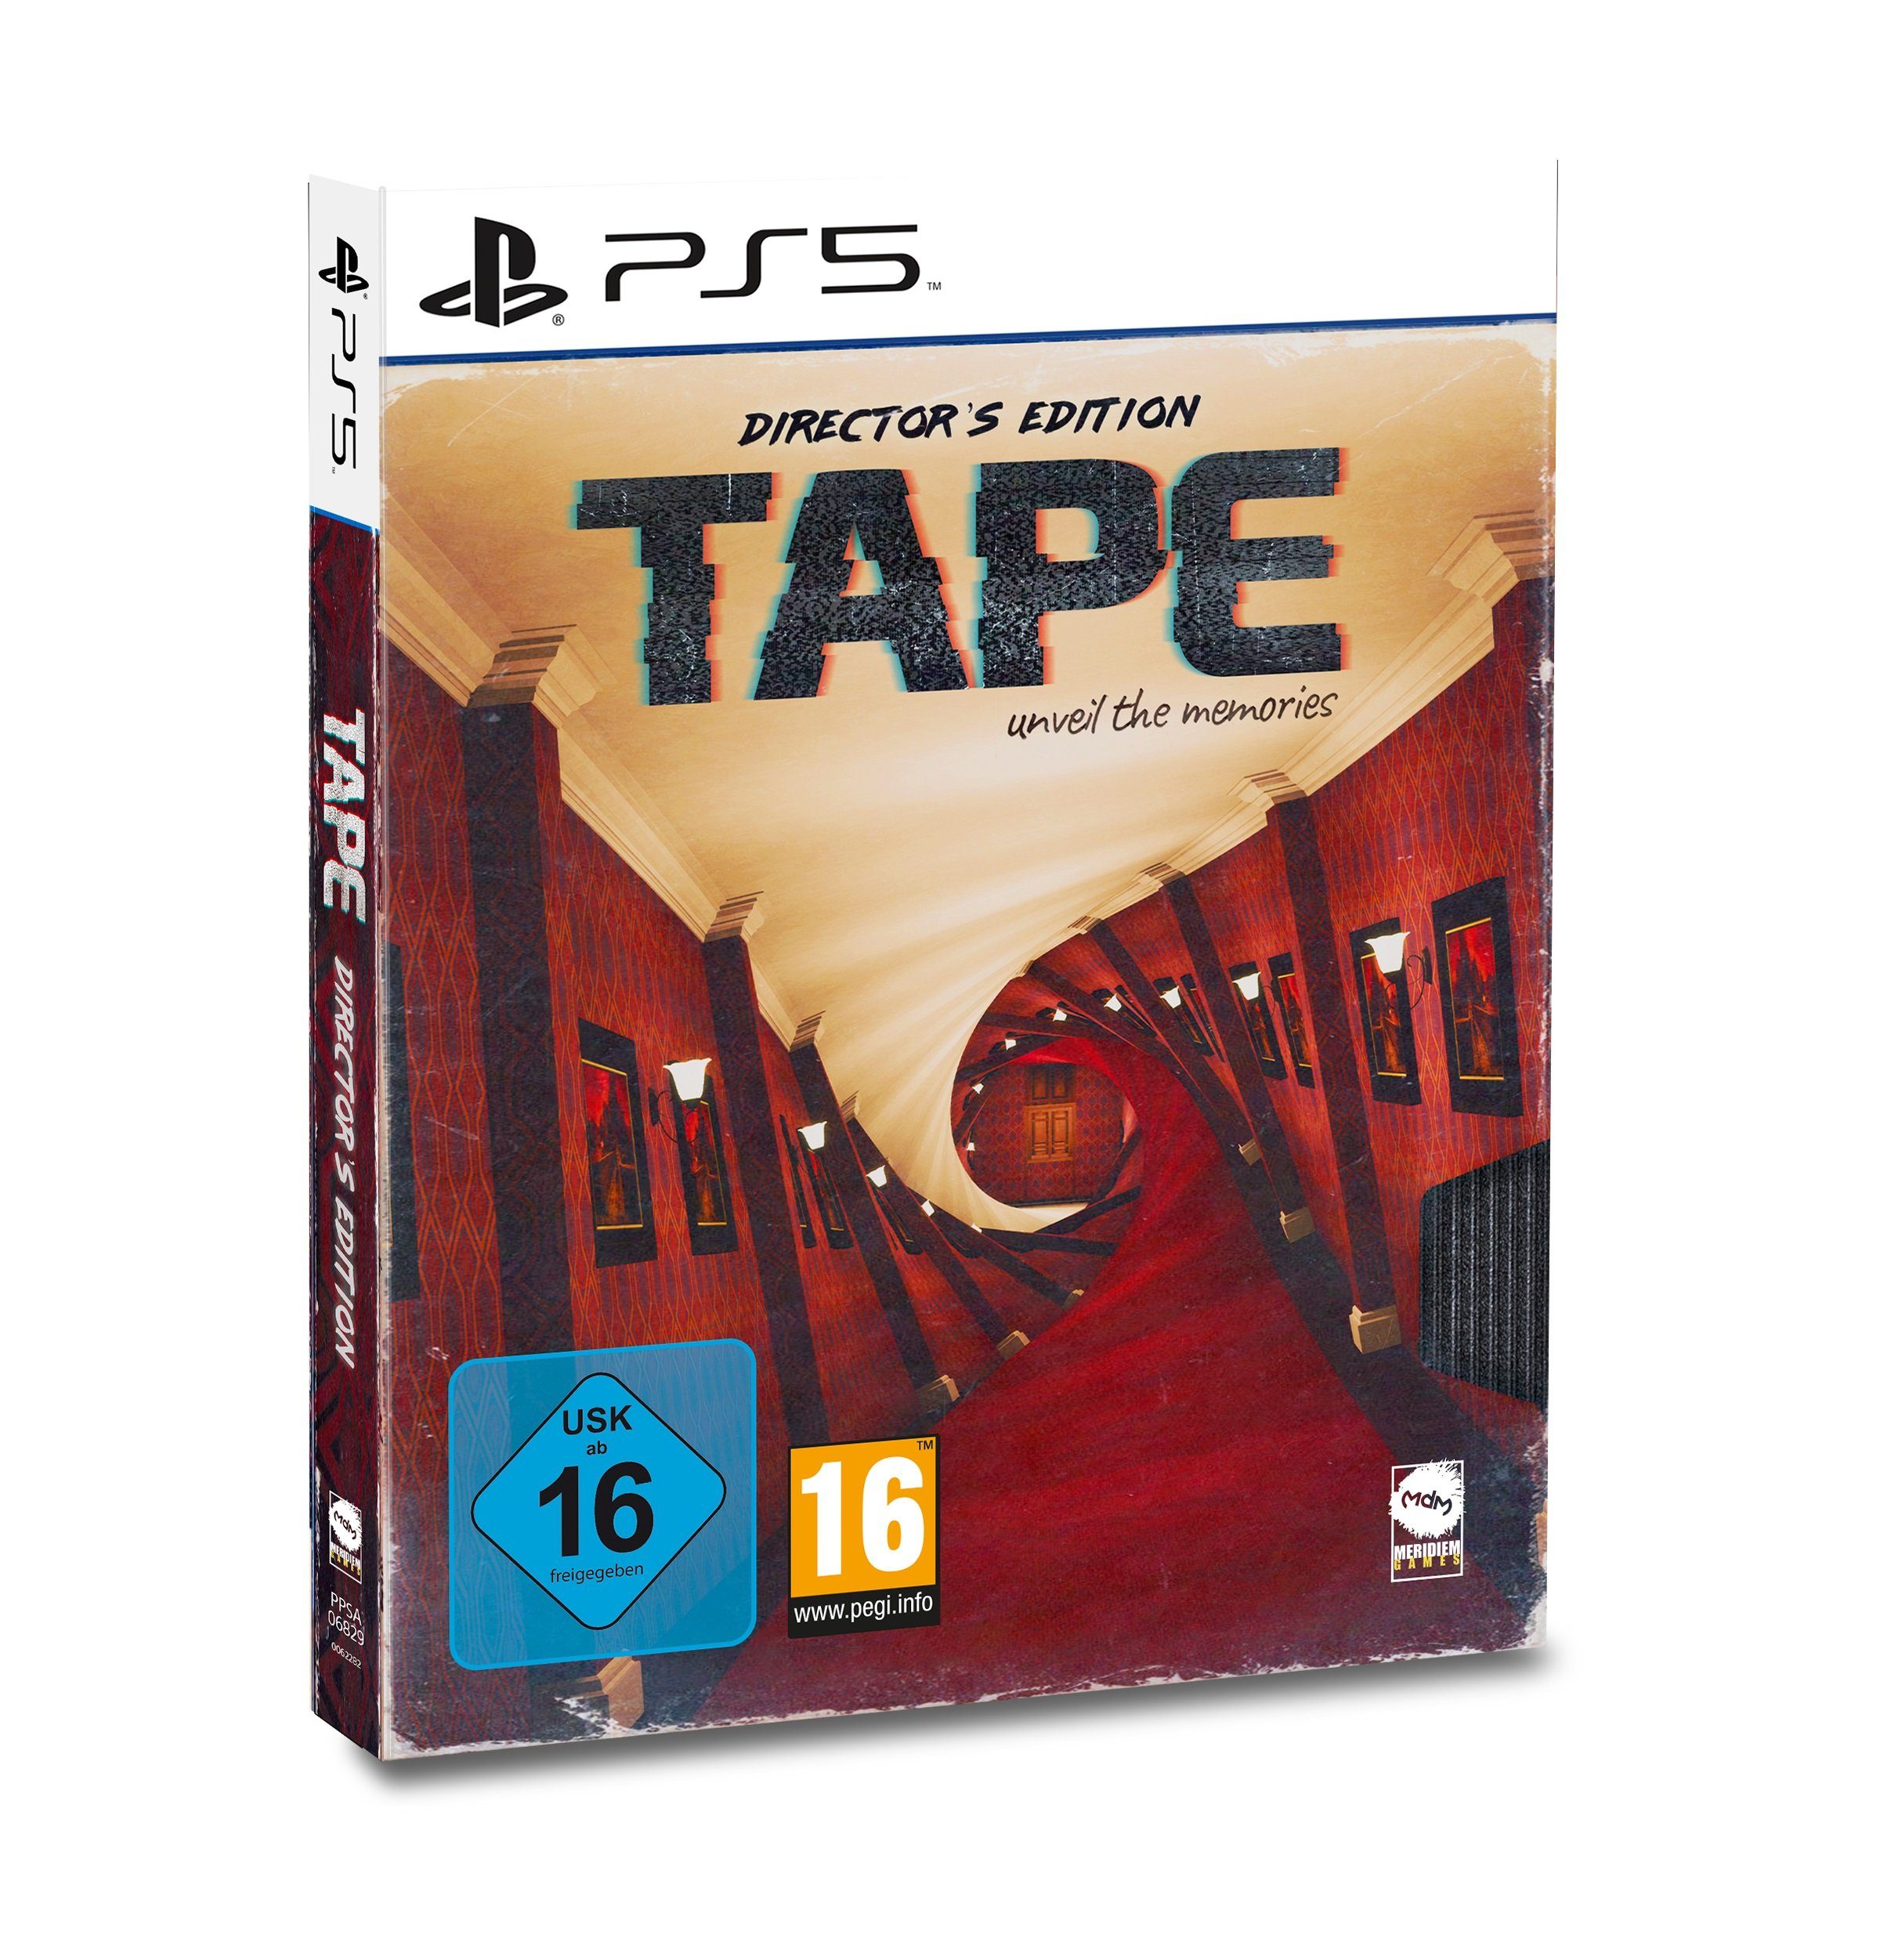 PlayStation 5 TAPE: Unveil Directors the Edition Memories